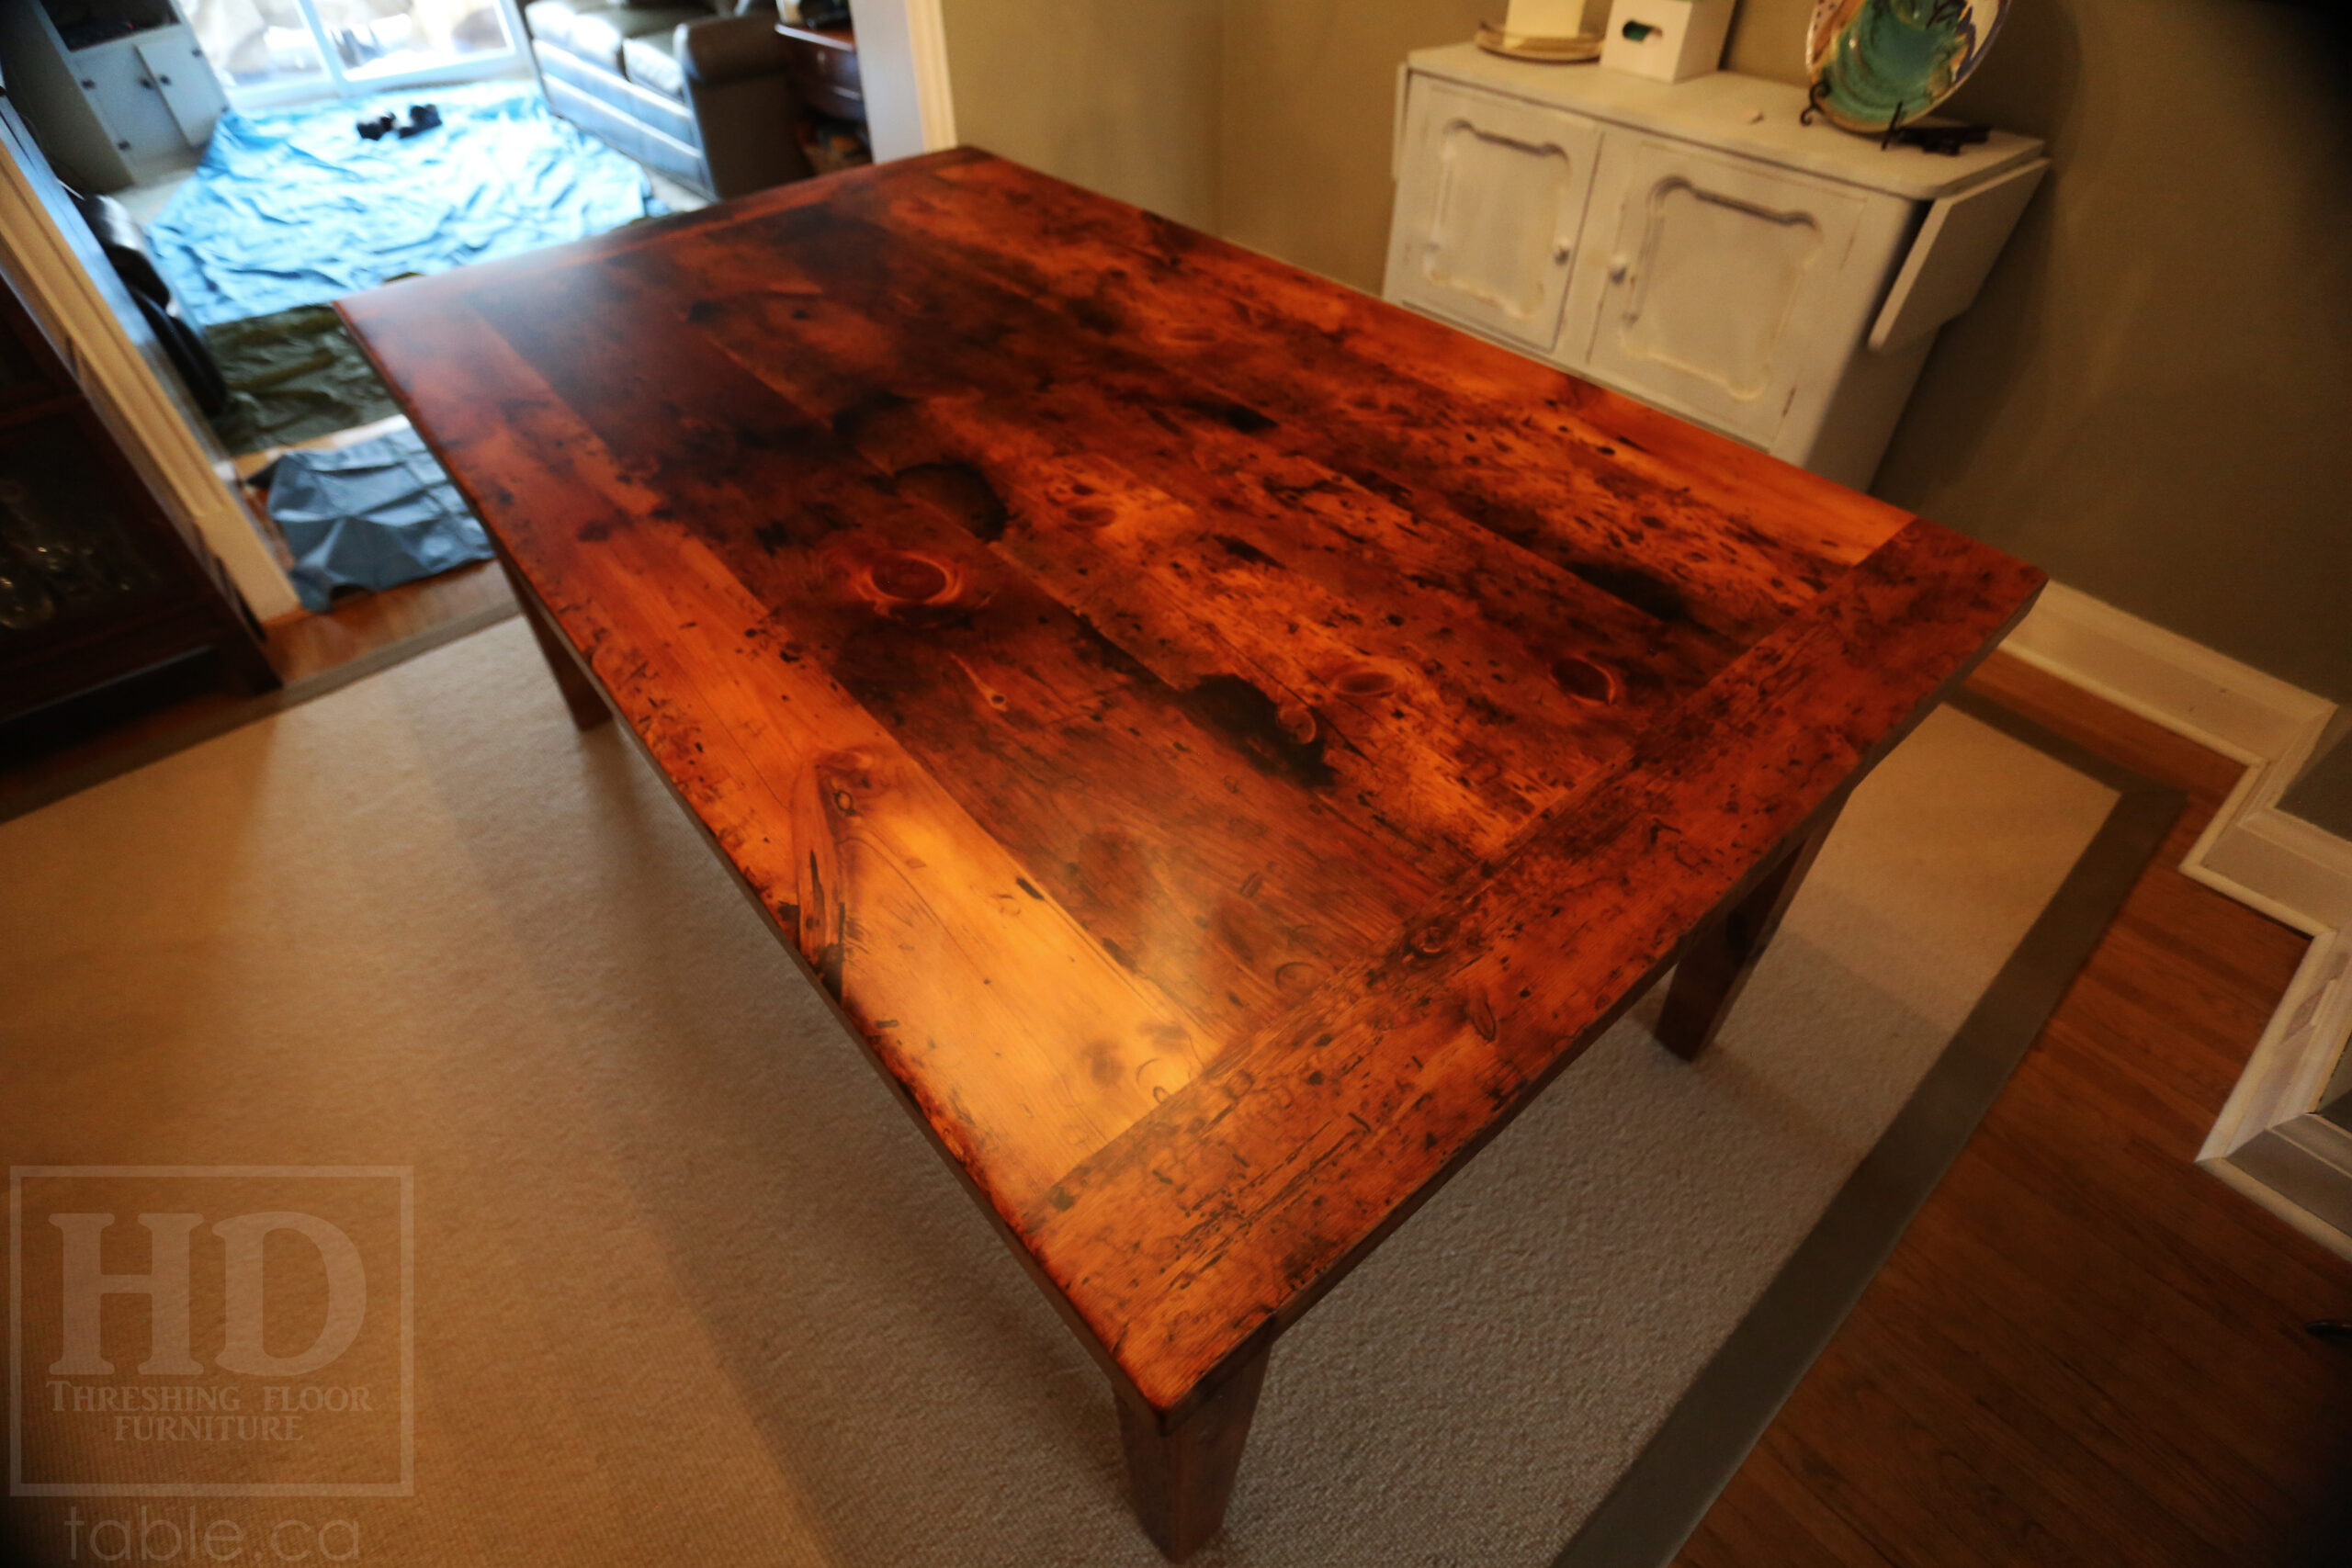 6’ Reclaimed Ontario Barnwood Table – 42” wide – Harvest Base / Tapered with a Notch Windbrace Beam Legs - Old Growth Pine Threshing Floor Construction - Original edges & distressing maintained – Bread Edge Ends – Premium epoxy + satin polyurethane finish – [1] 18” leaf - www.table.ca